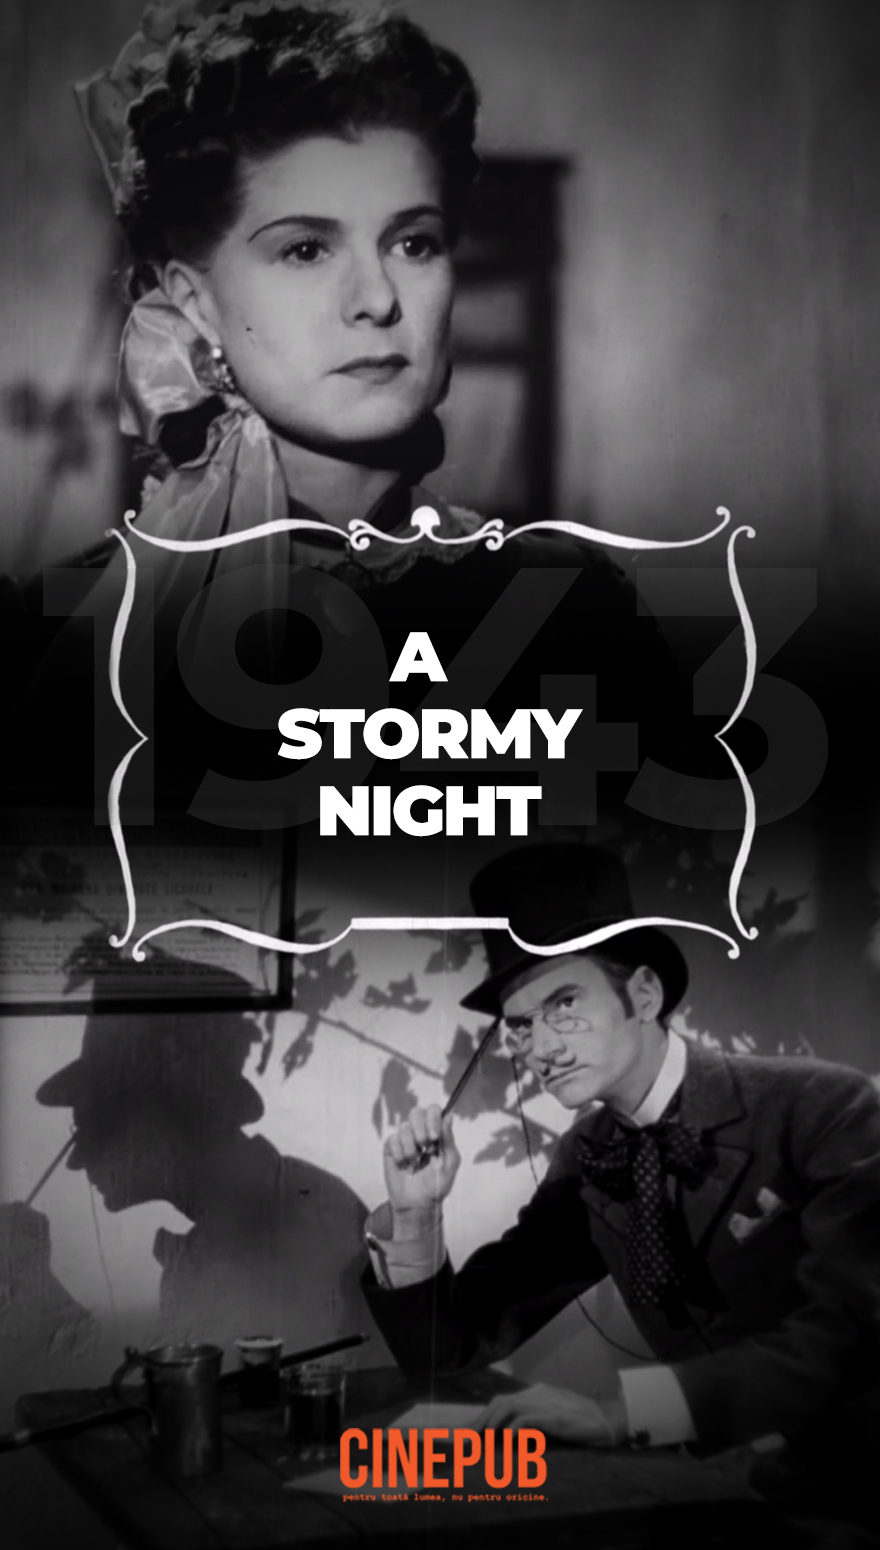 A stormy night - feature film from 1943 - debut of Radu Beligan - feature film online on CINEPUB